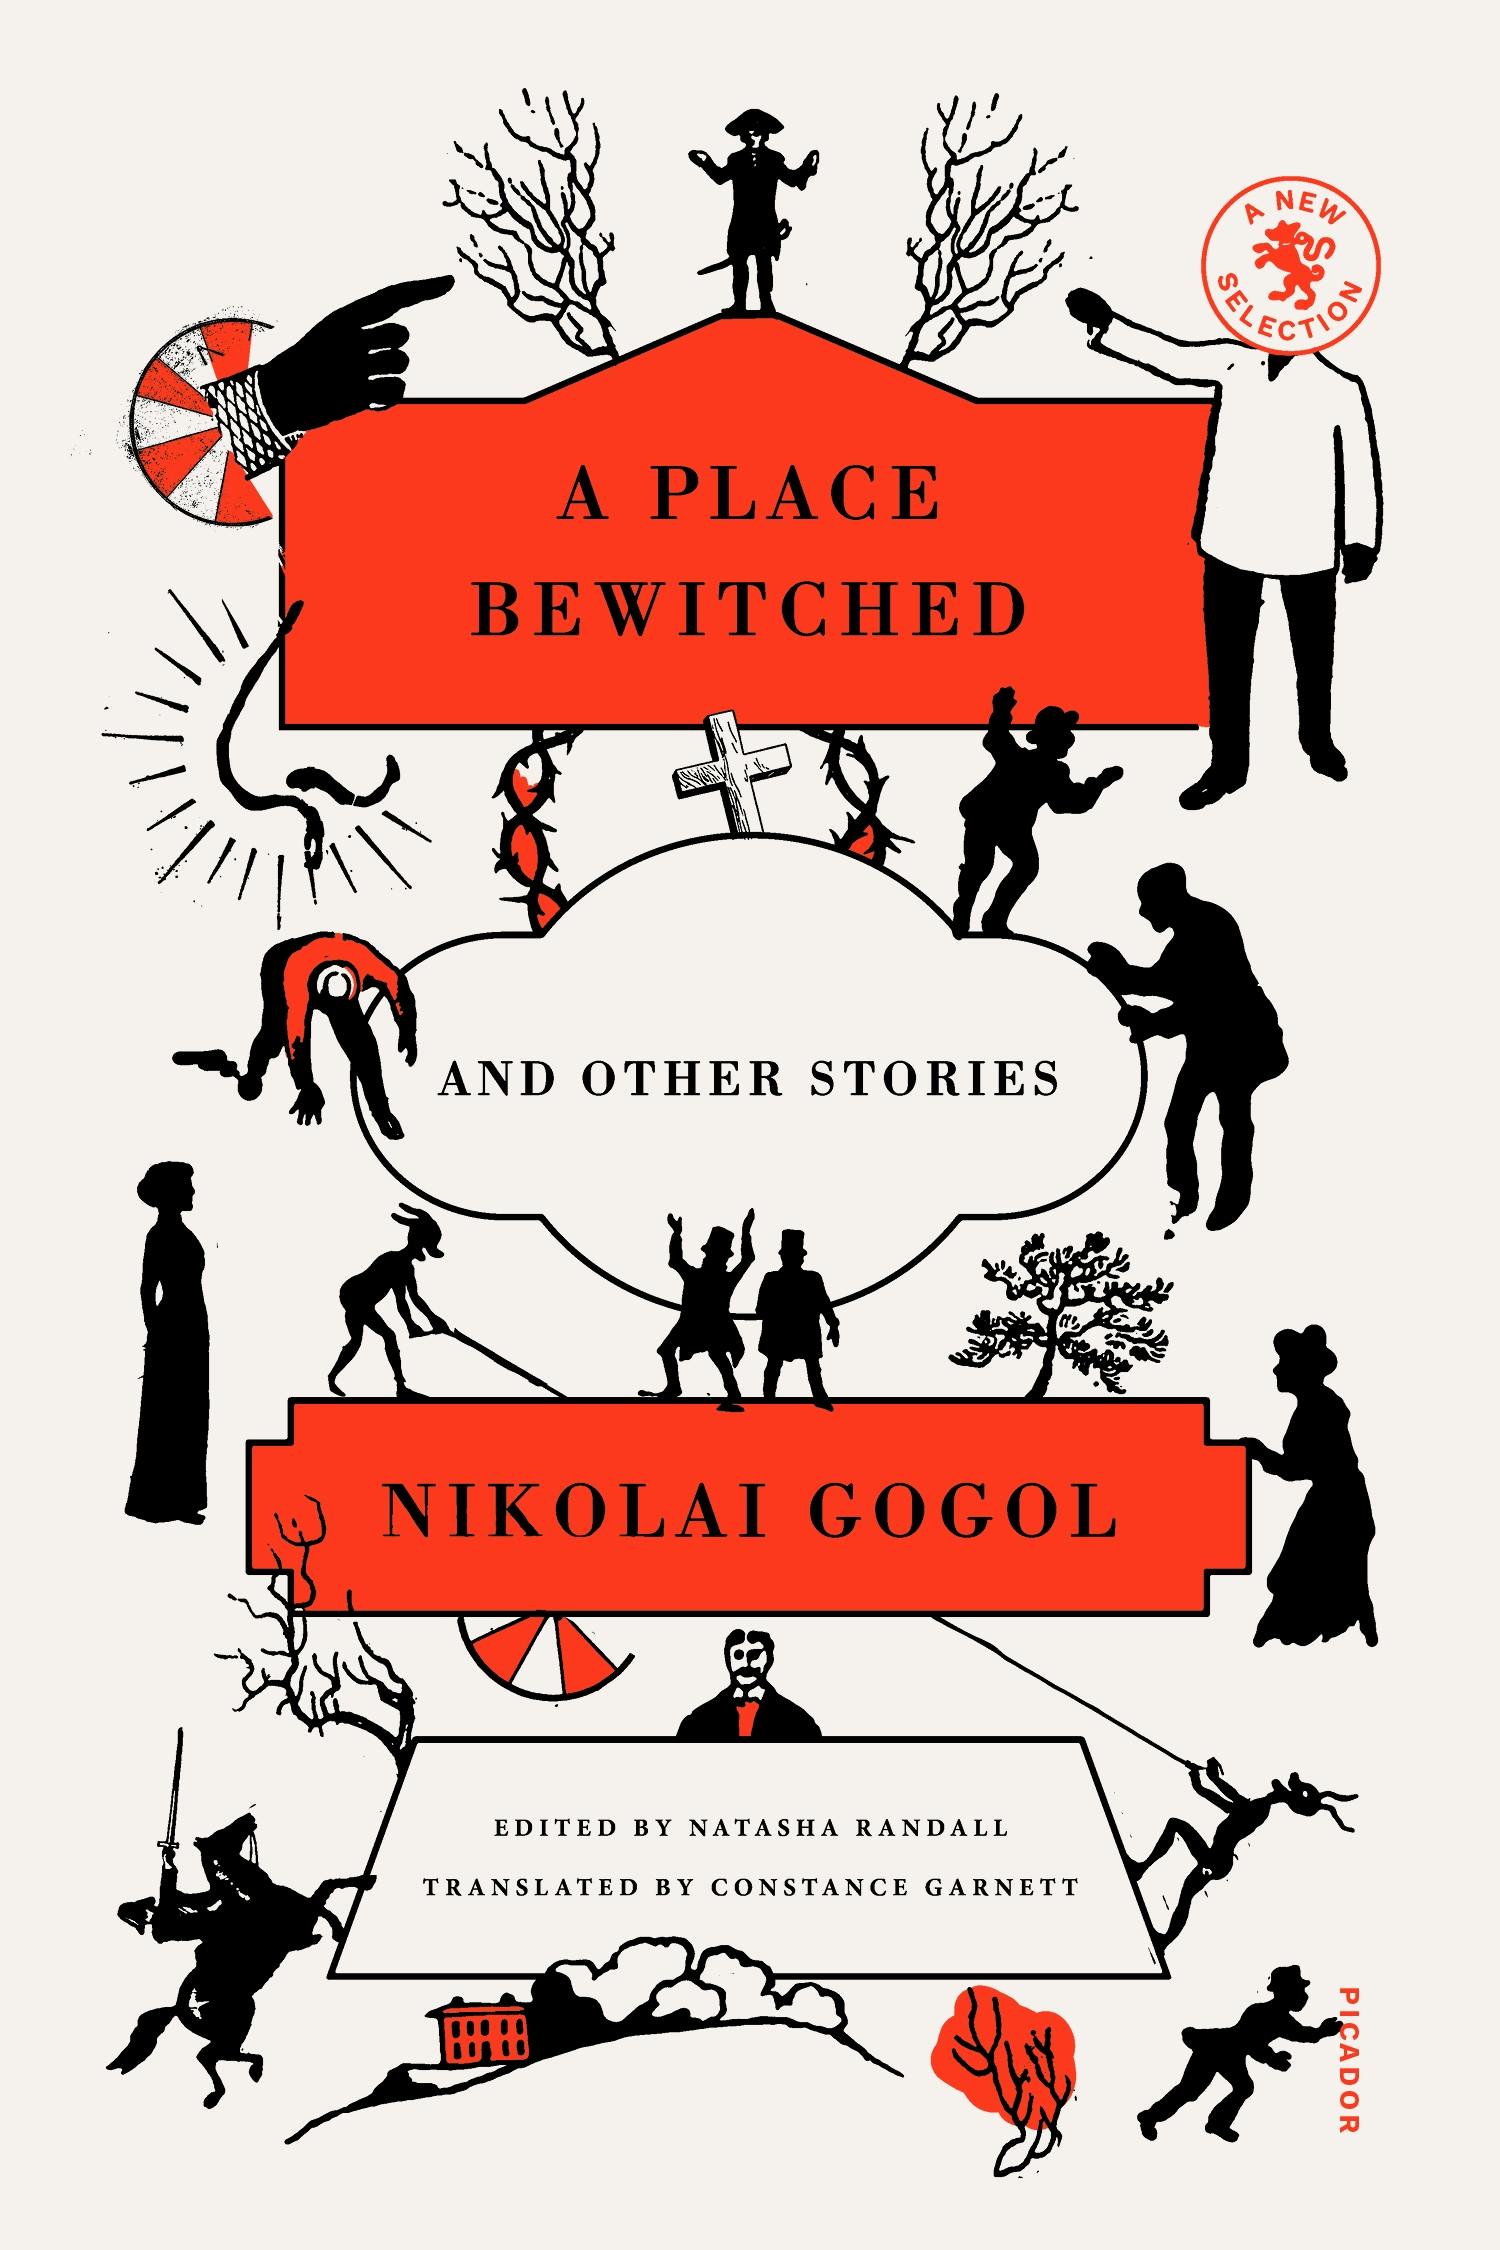 The Nose By Nikolai Gogol Was Incredibly Strange To Me That Is Not